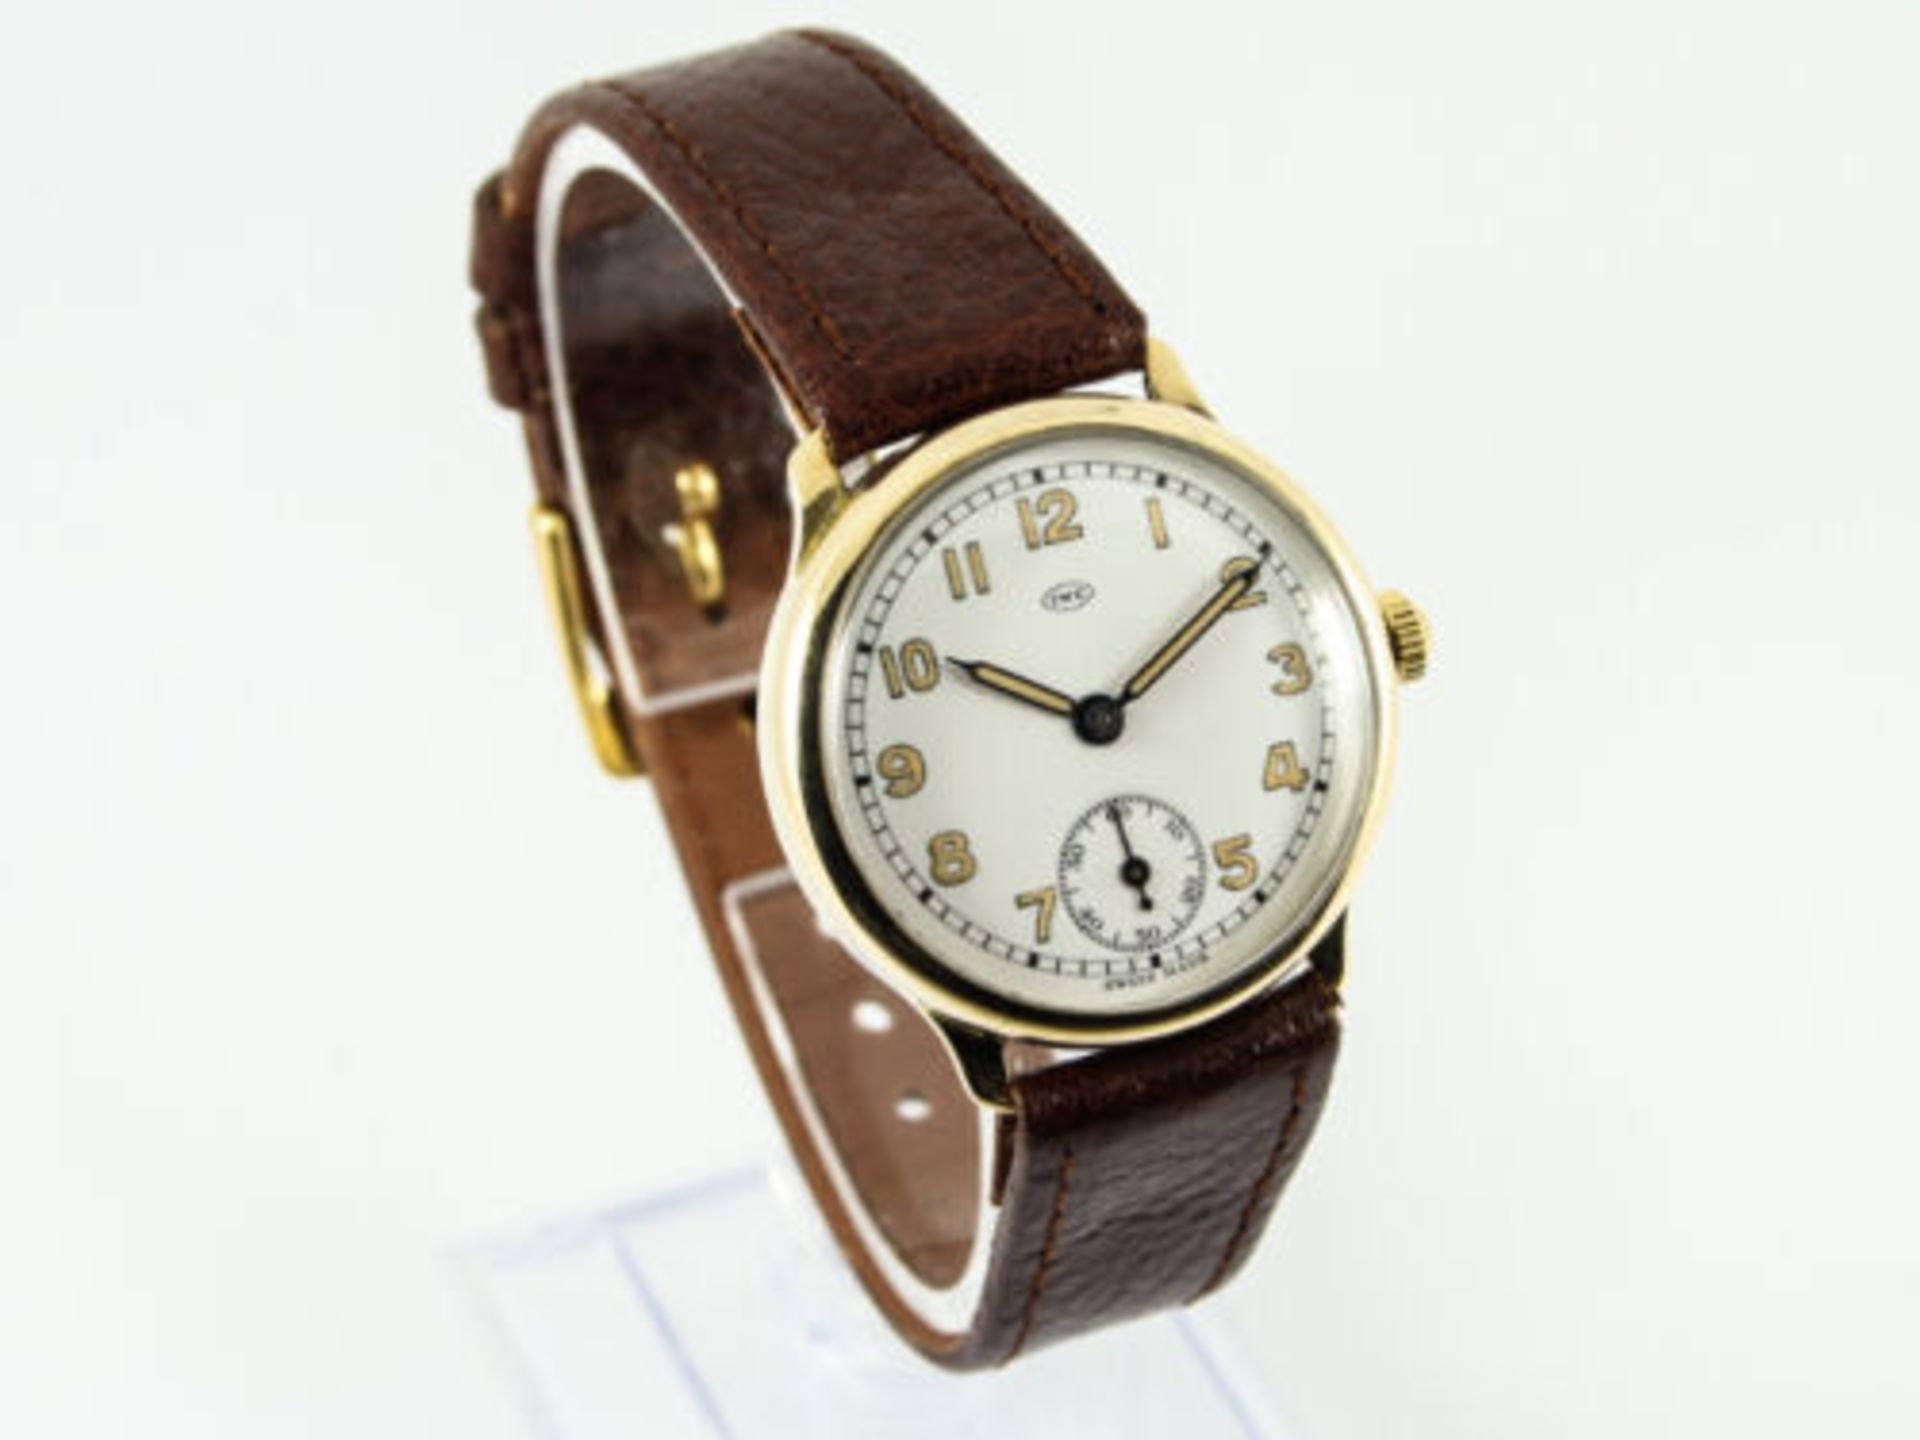 RARE IWC TRENCH WATCH INTERNATIONAL WATCH COMPANY GOLD OFFICERS - Image 3 of 4